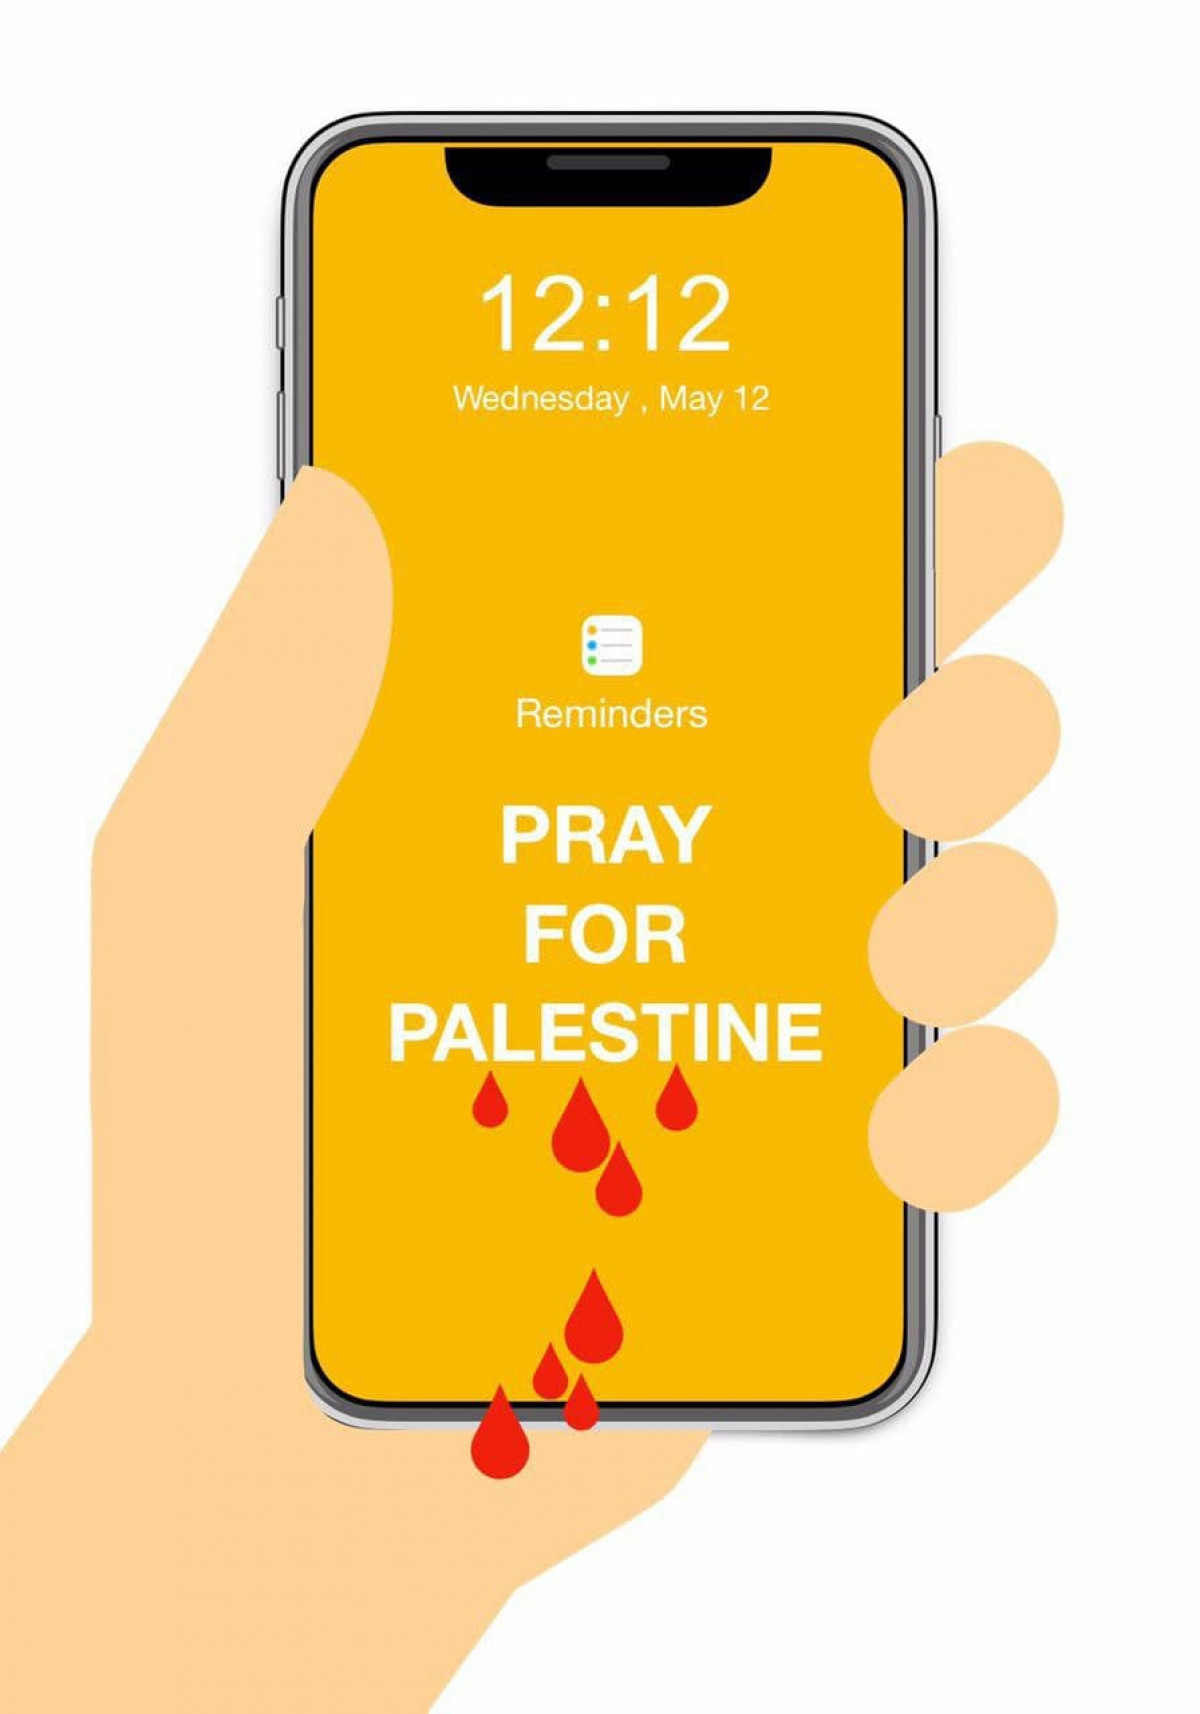 Collection of posters: Pray for palestine